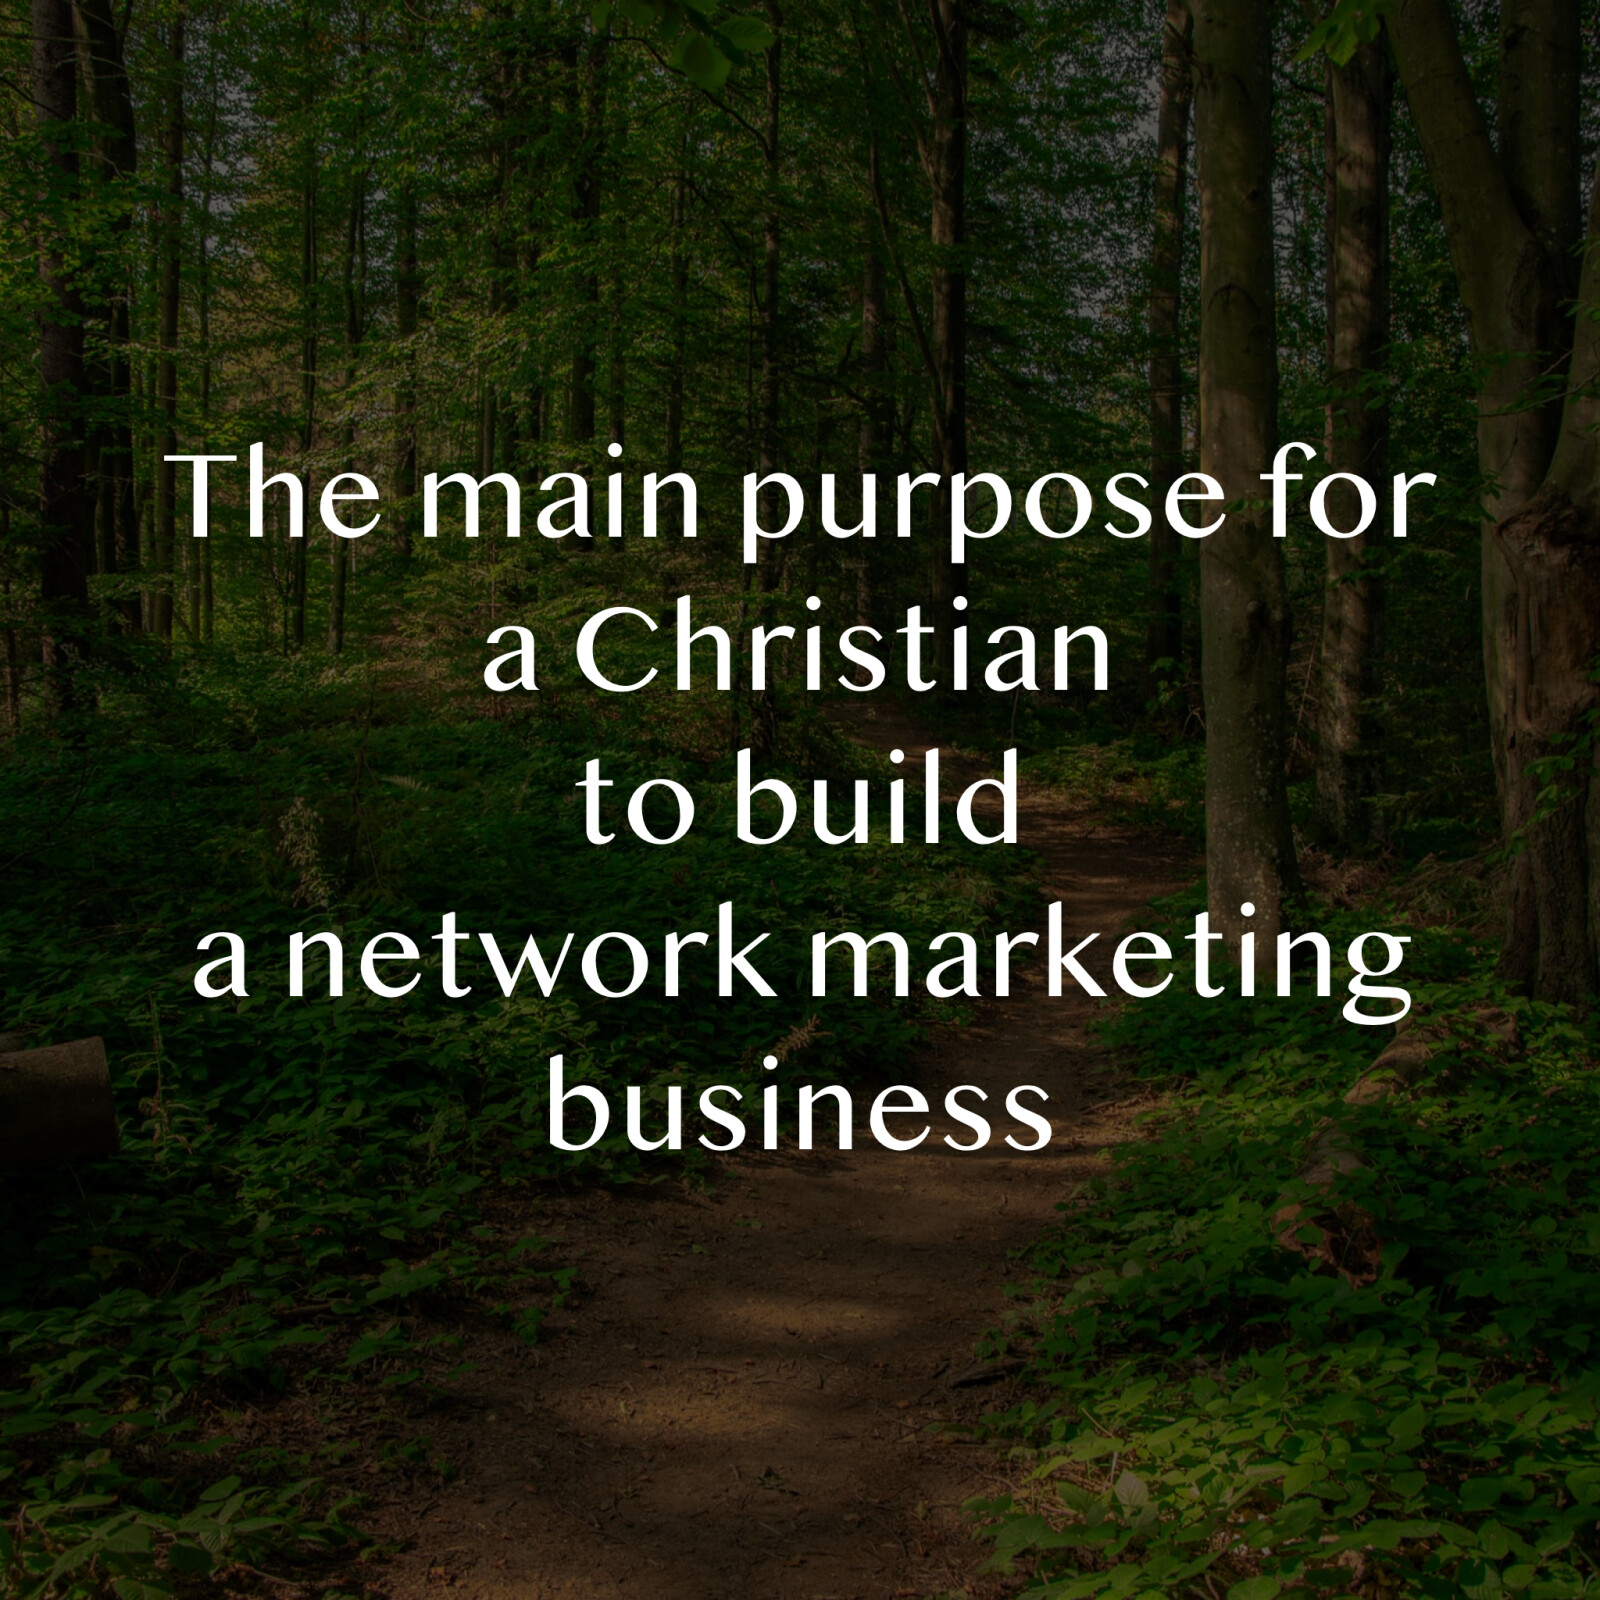 The Main Purpose for a Christian to Build a Network Marketing Business